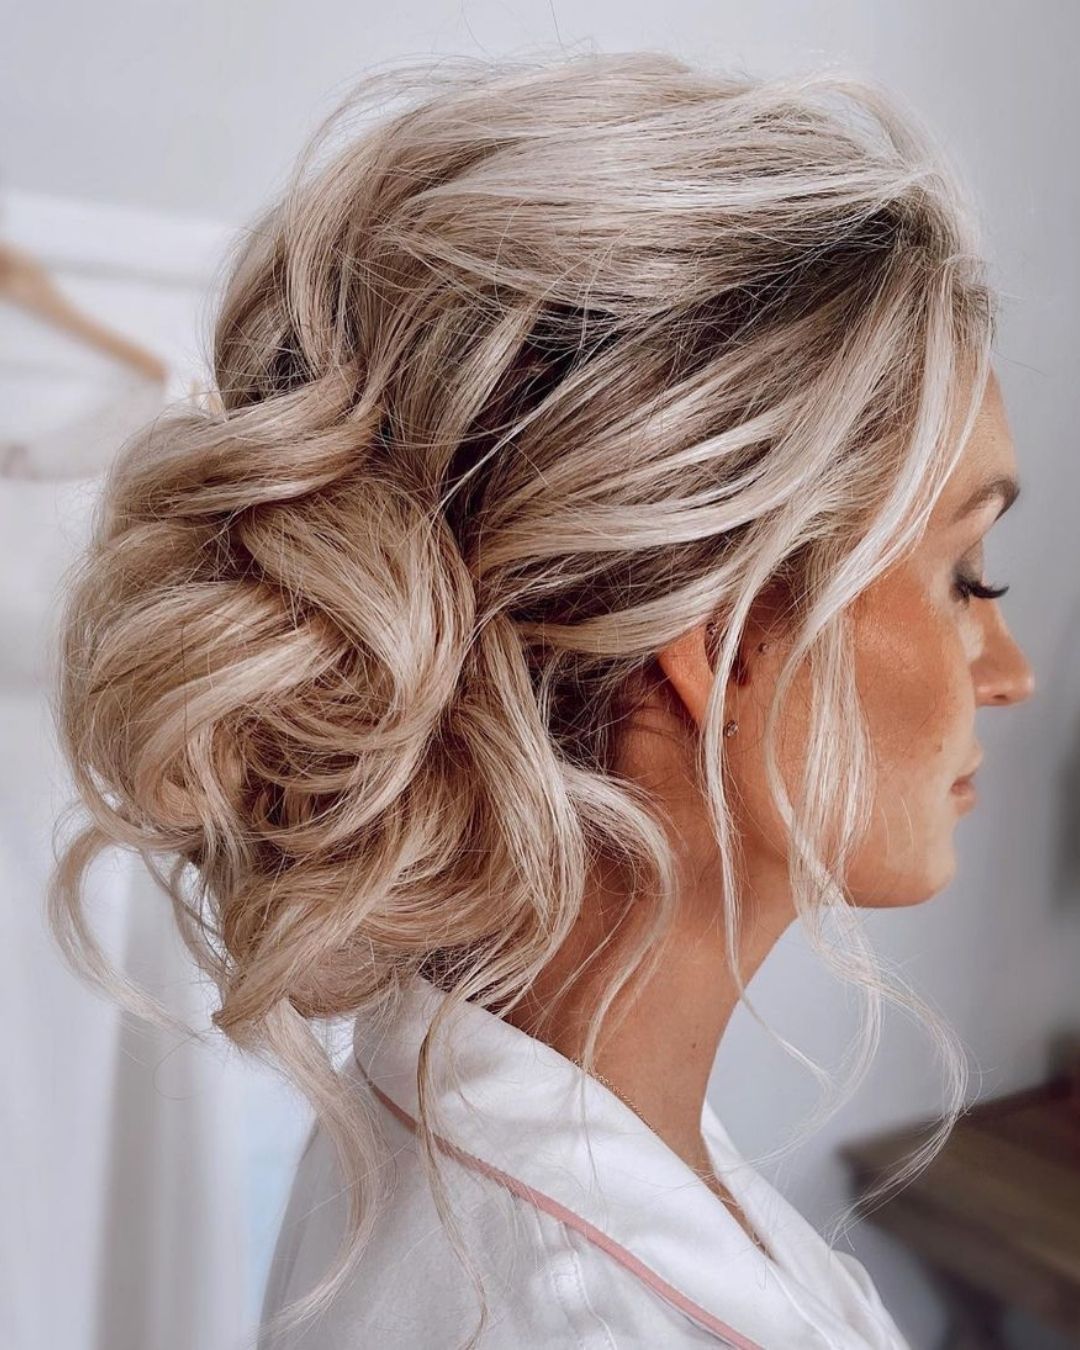 side buns wedding hairstyles curly side bun hairstyle1